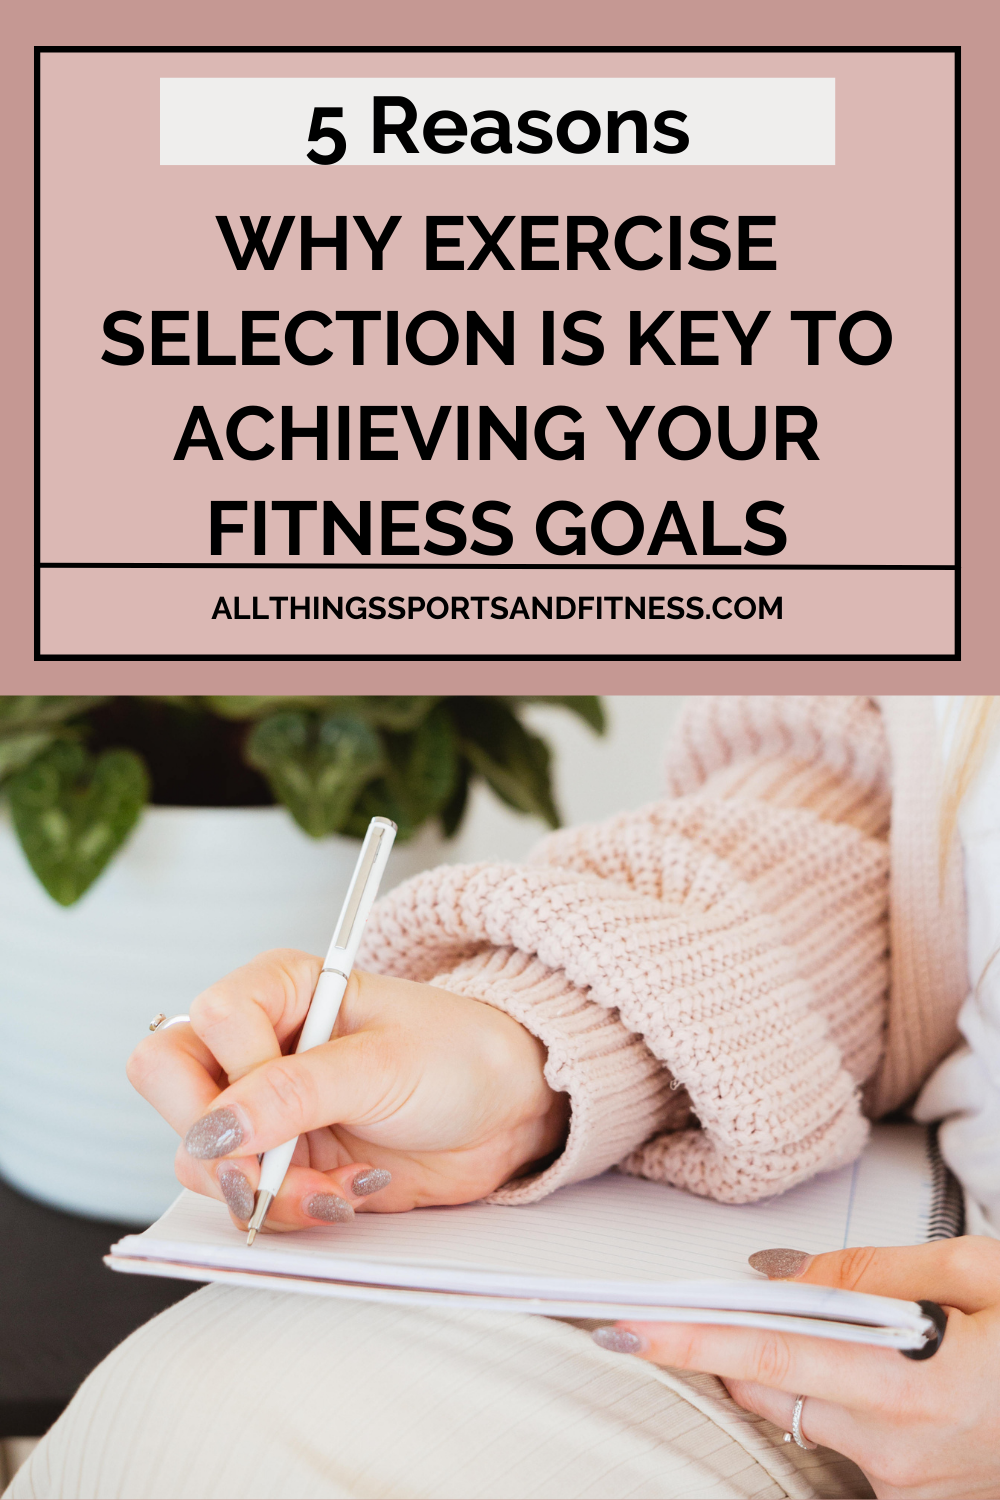 5 Reasons Why Exercise Selection Is Key to Achieving Your Fitness Goals